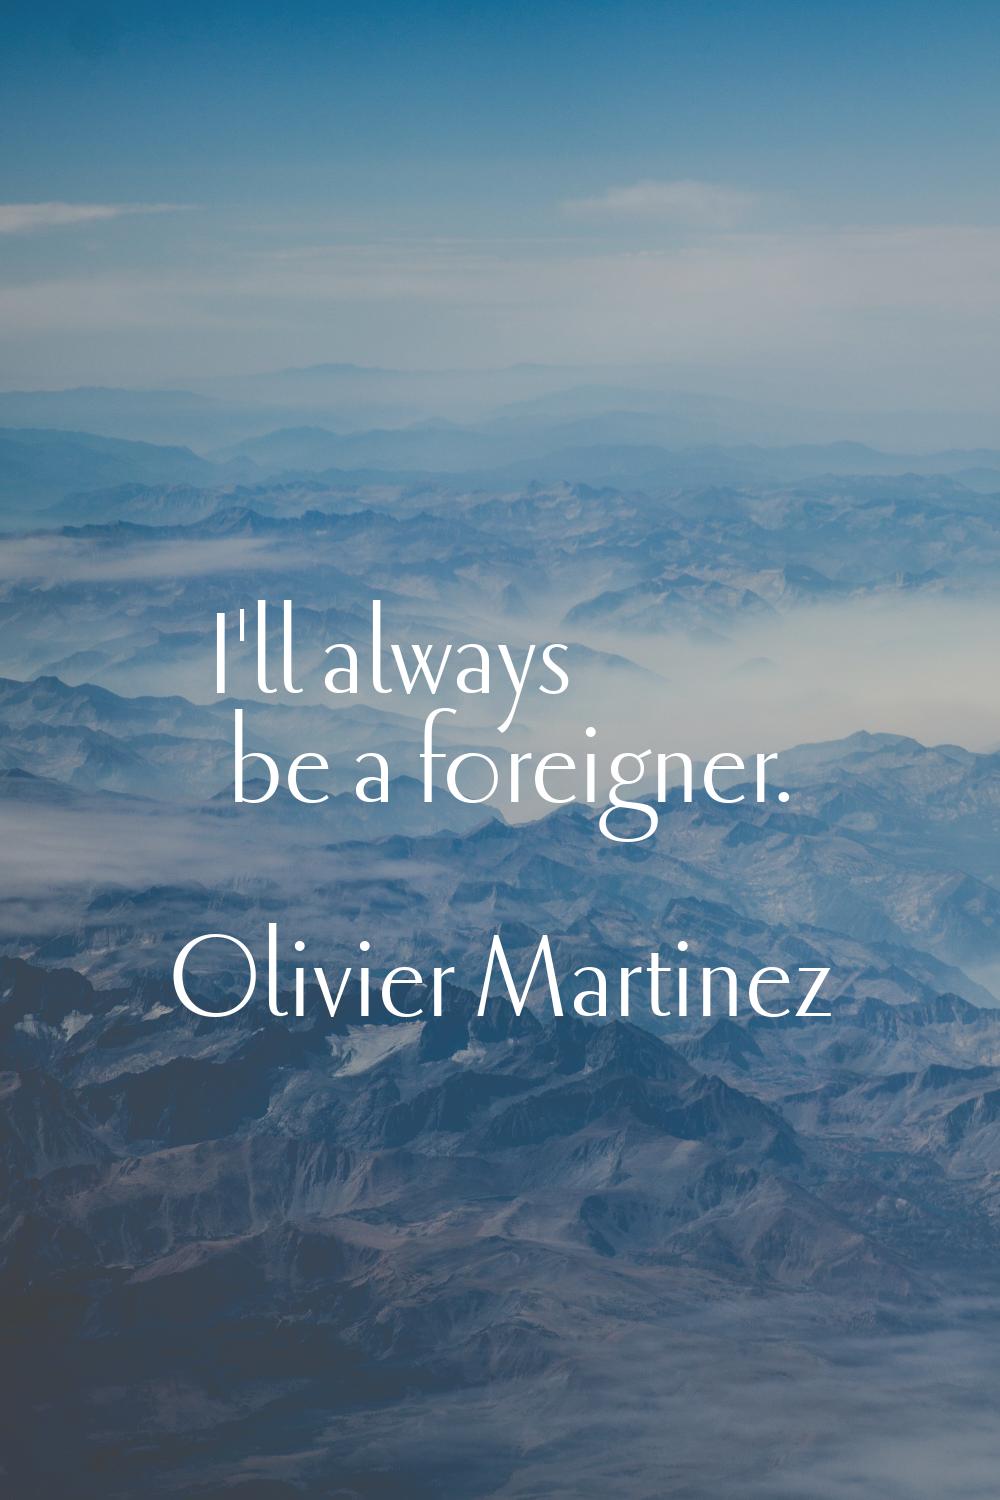 I'll always be a foreigner.